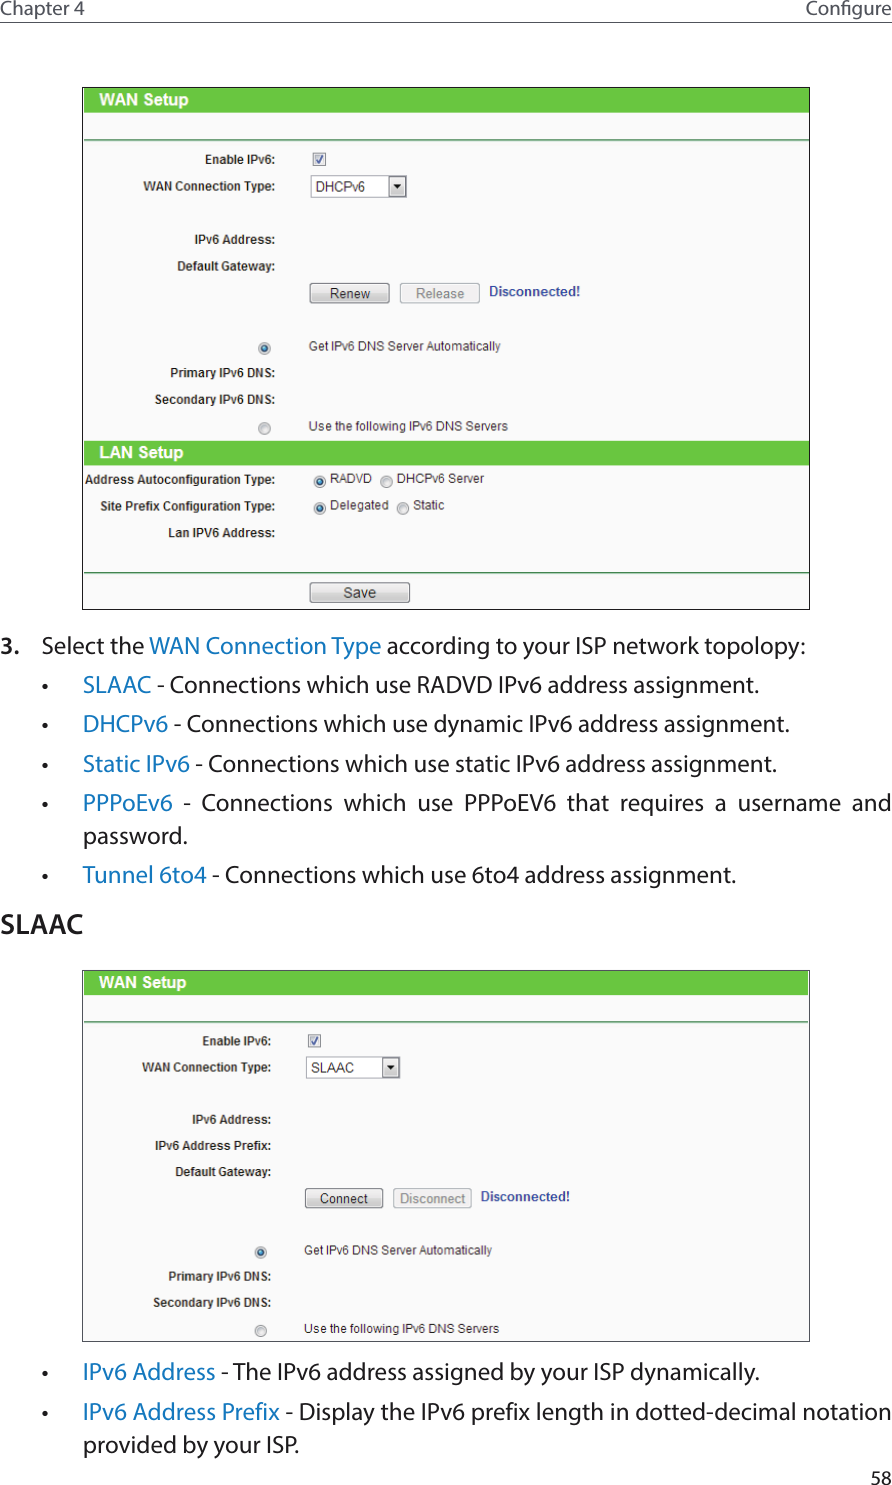 58Chapter 4 Congure3.  Select the WAN Connection Type according to your ISP network topolopy:•  SLAAC - Connections which use RADVD IPv6 address assignment.•  DHCPv6 - Connections which use dynamic IPv6 address assignment. •  Static IPv6 - Connections which use static IPv6 address assignment. •  PPPoEv6  - Connections which use PPPoEV6 that requires a username and password. •  Tunnel 6to4 - Connections which use 6to4 address assignment.SLAAC•  IPv6 Address - The IPv6 address assigned by your ISP dynamically.•  IPv6 Address Prefix - Display the IPv6 prefix length in dotted-decimal notation provided by your ISP.